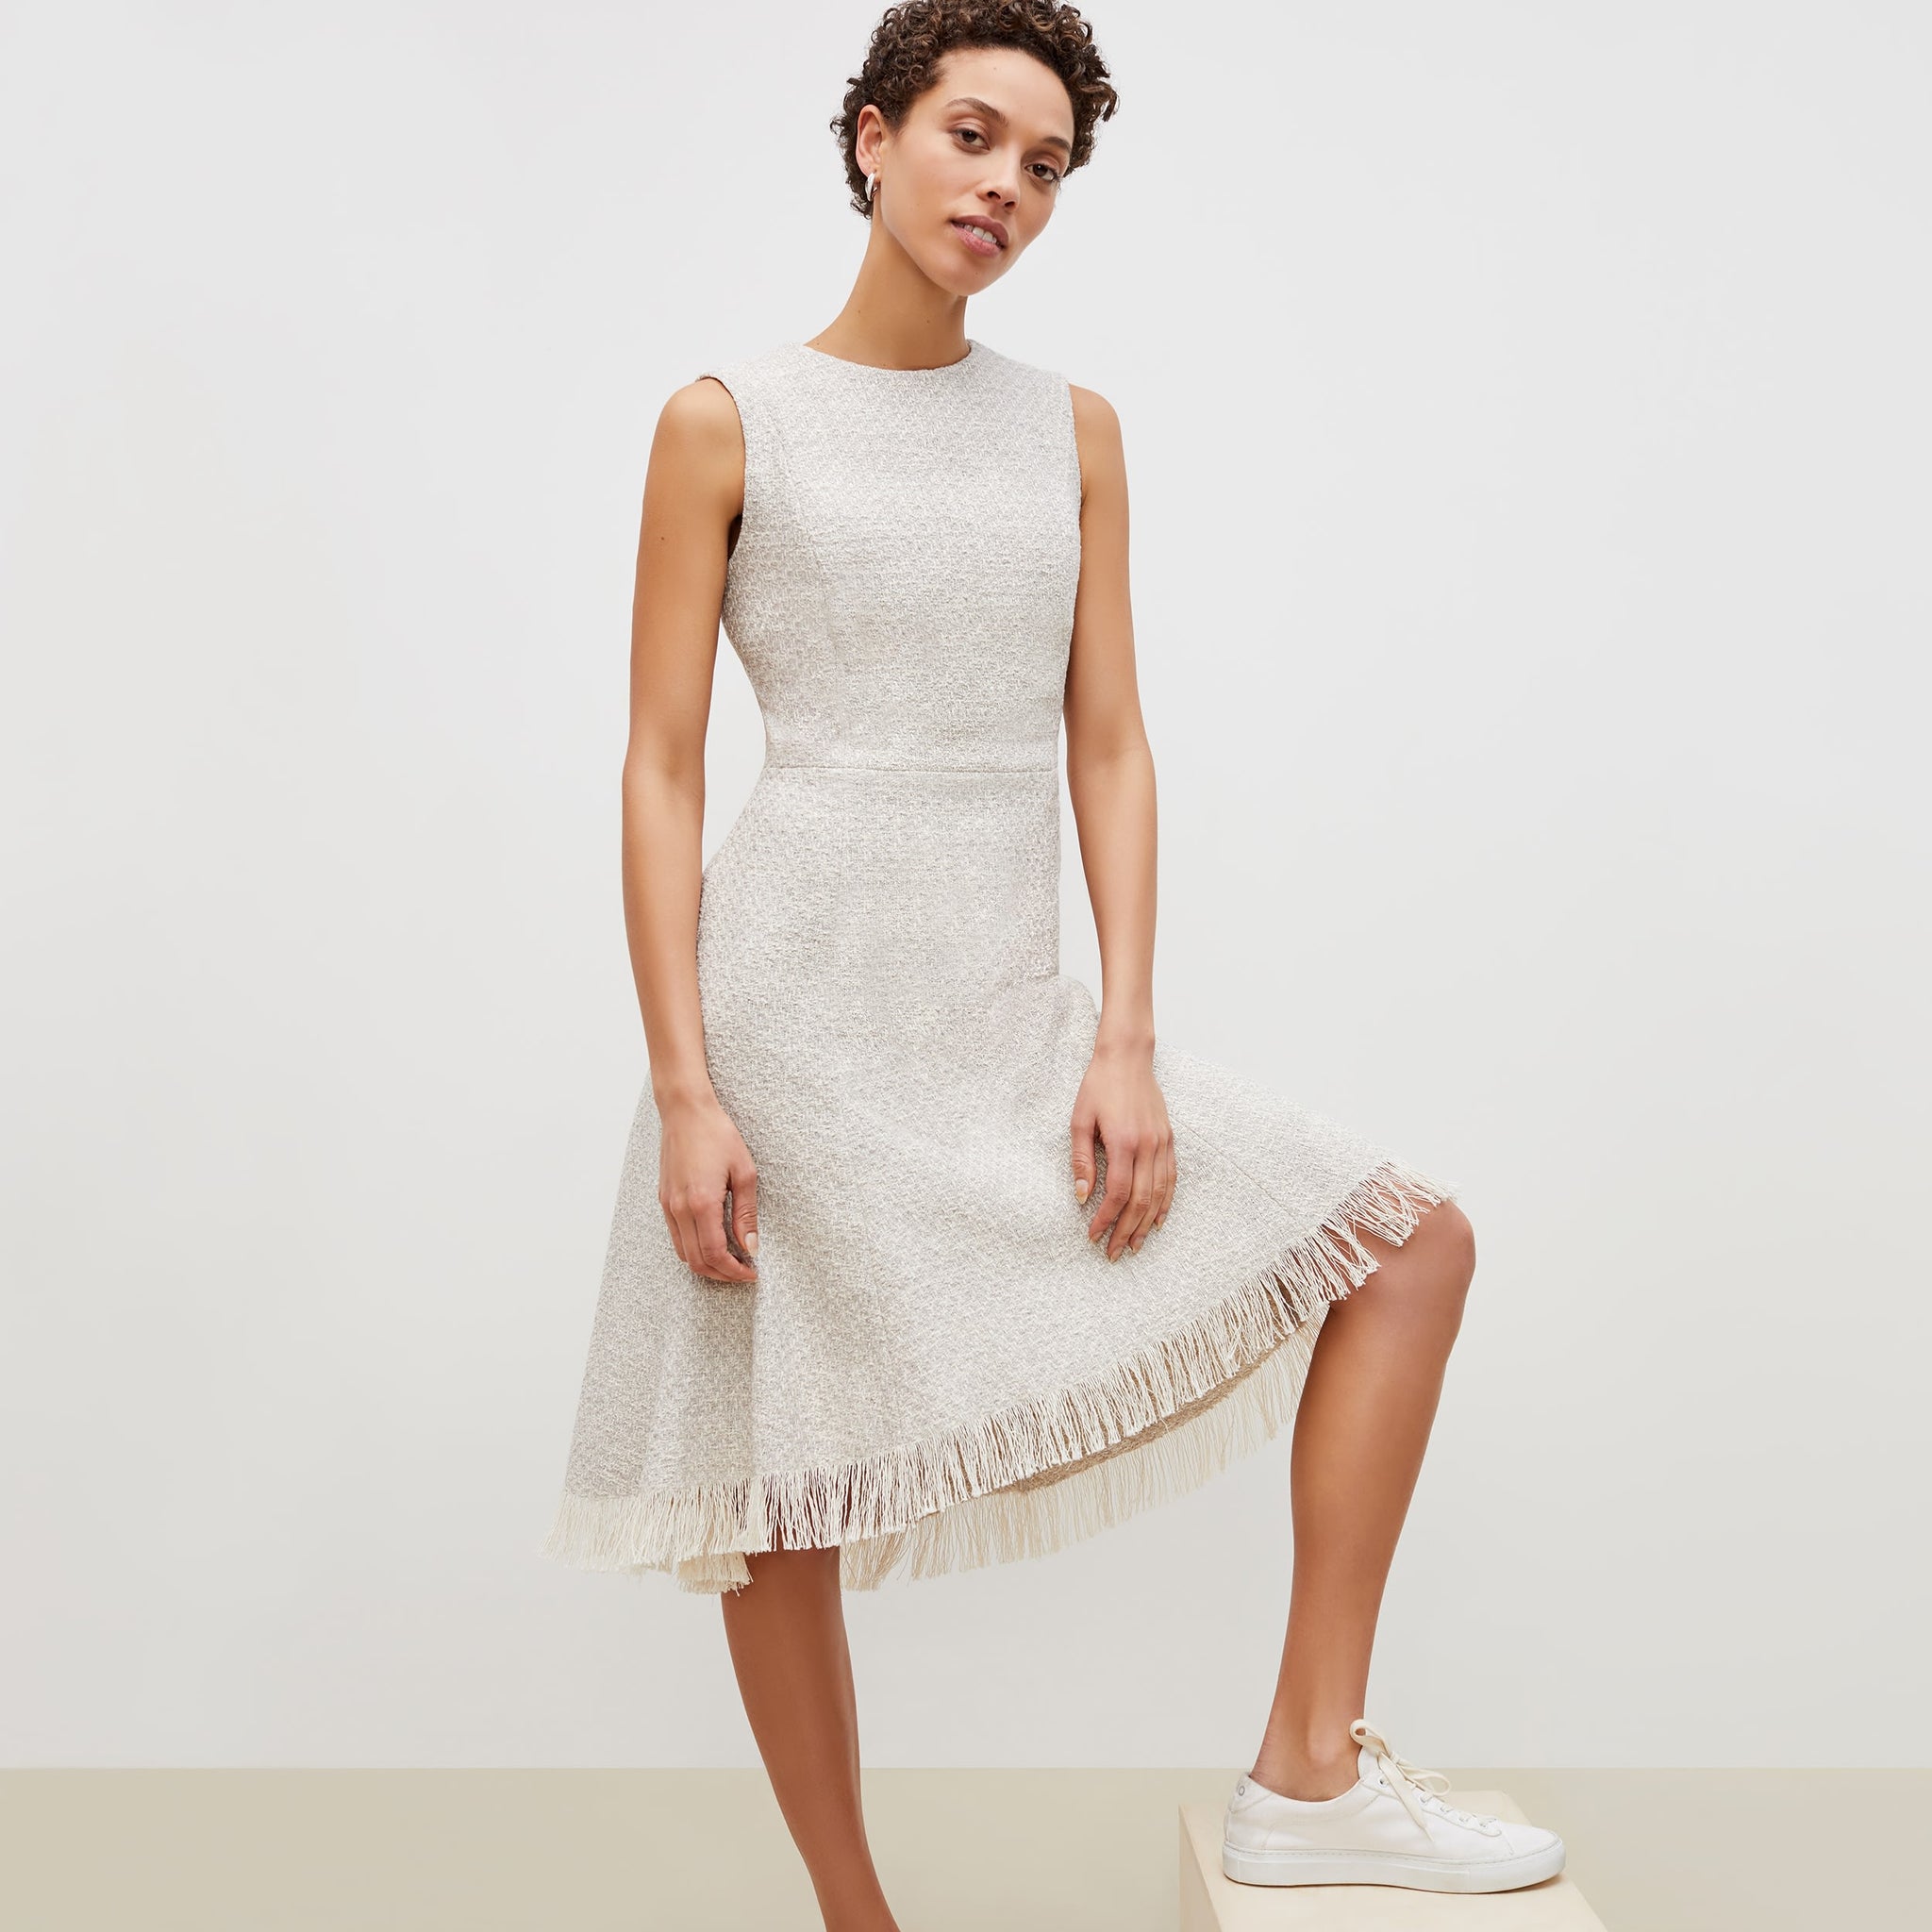 Front image of a woman standing wearing the lindsay dress cotton boucle in sea salt / ivory